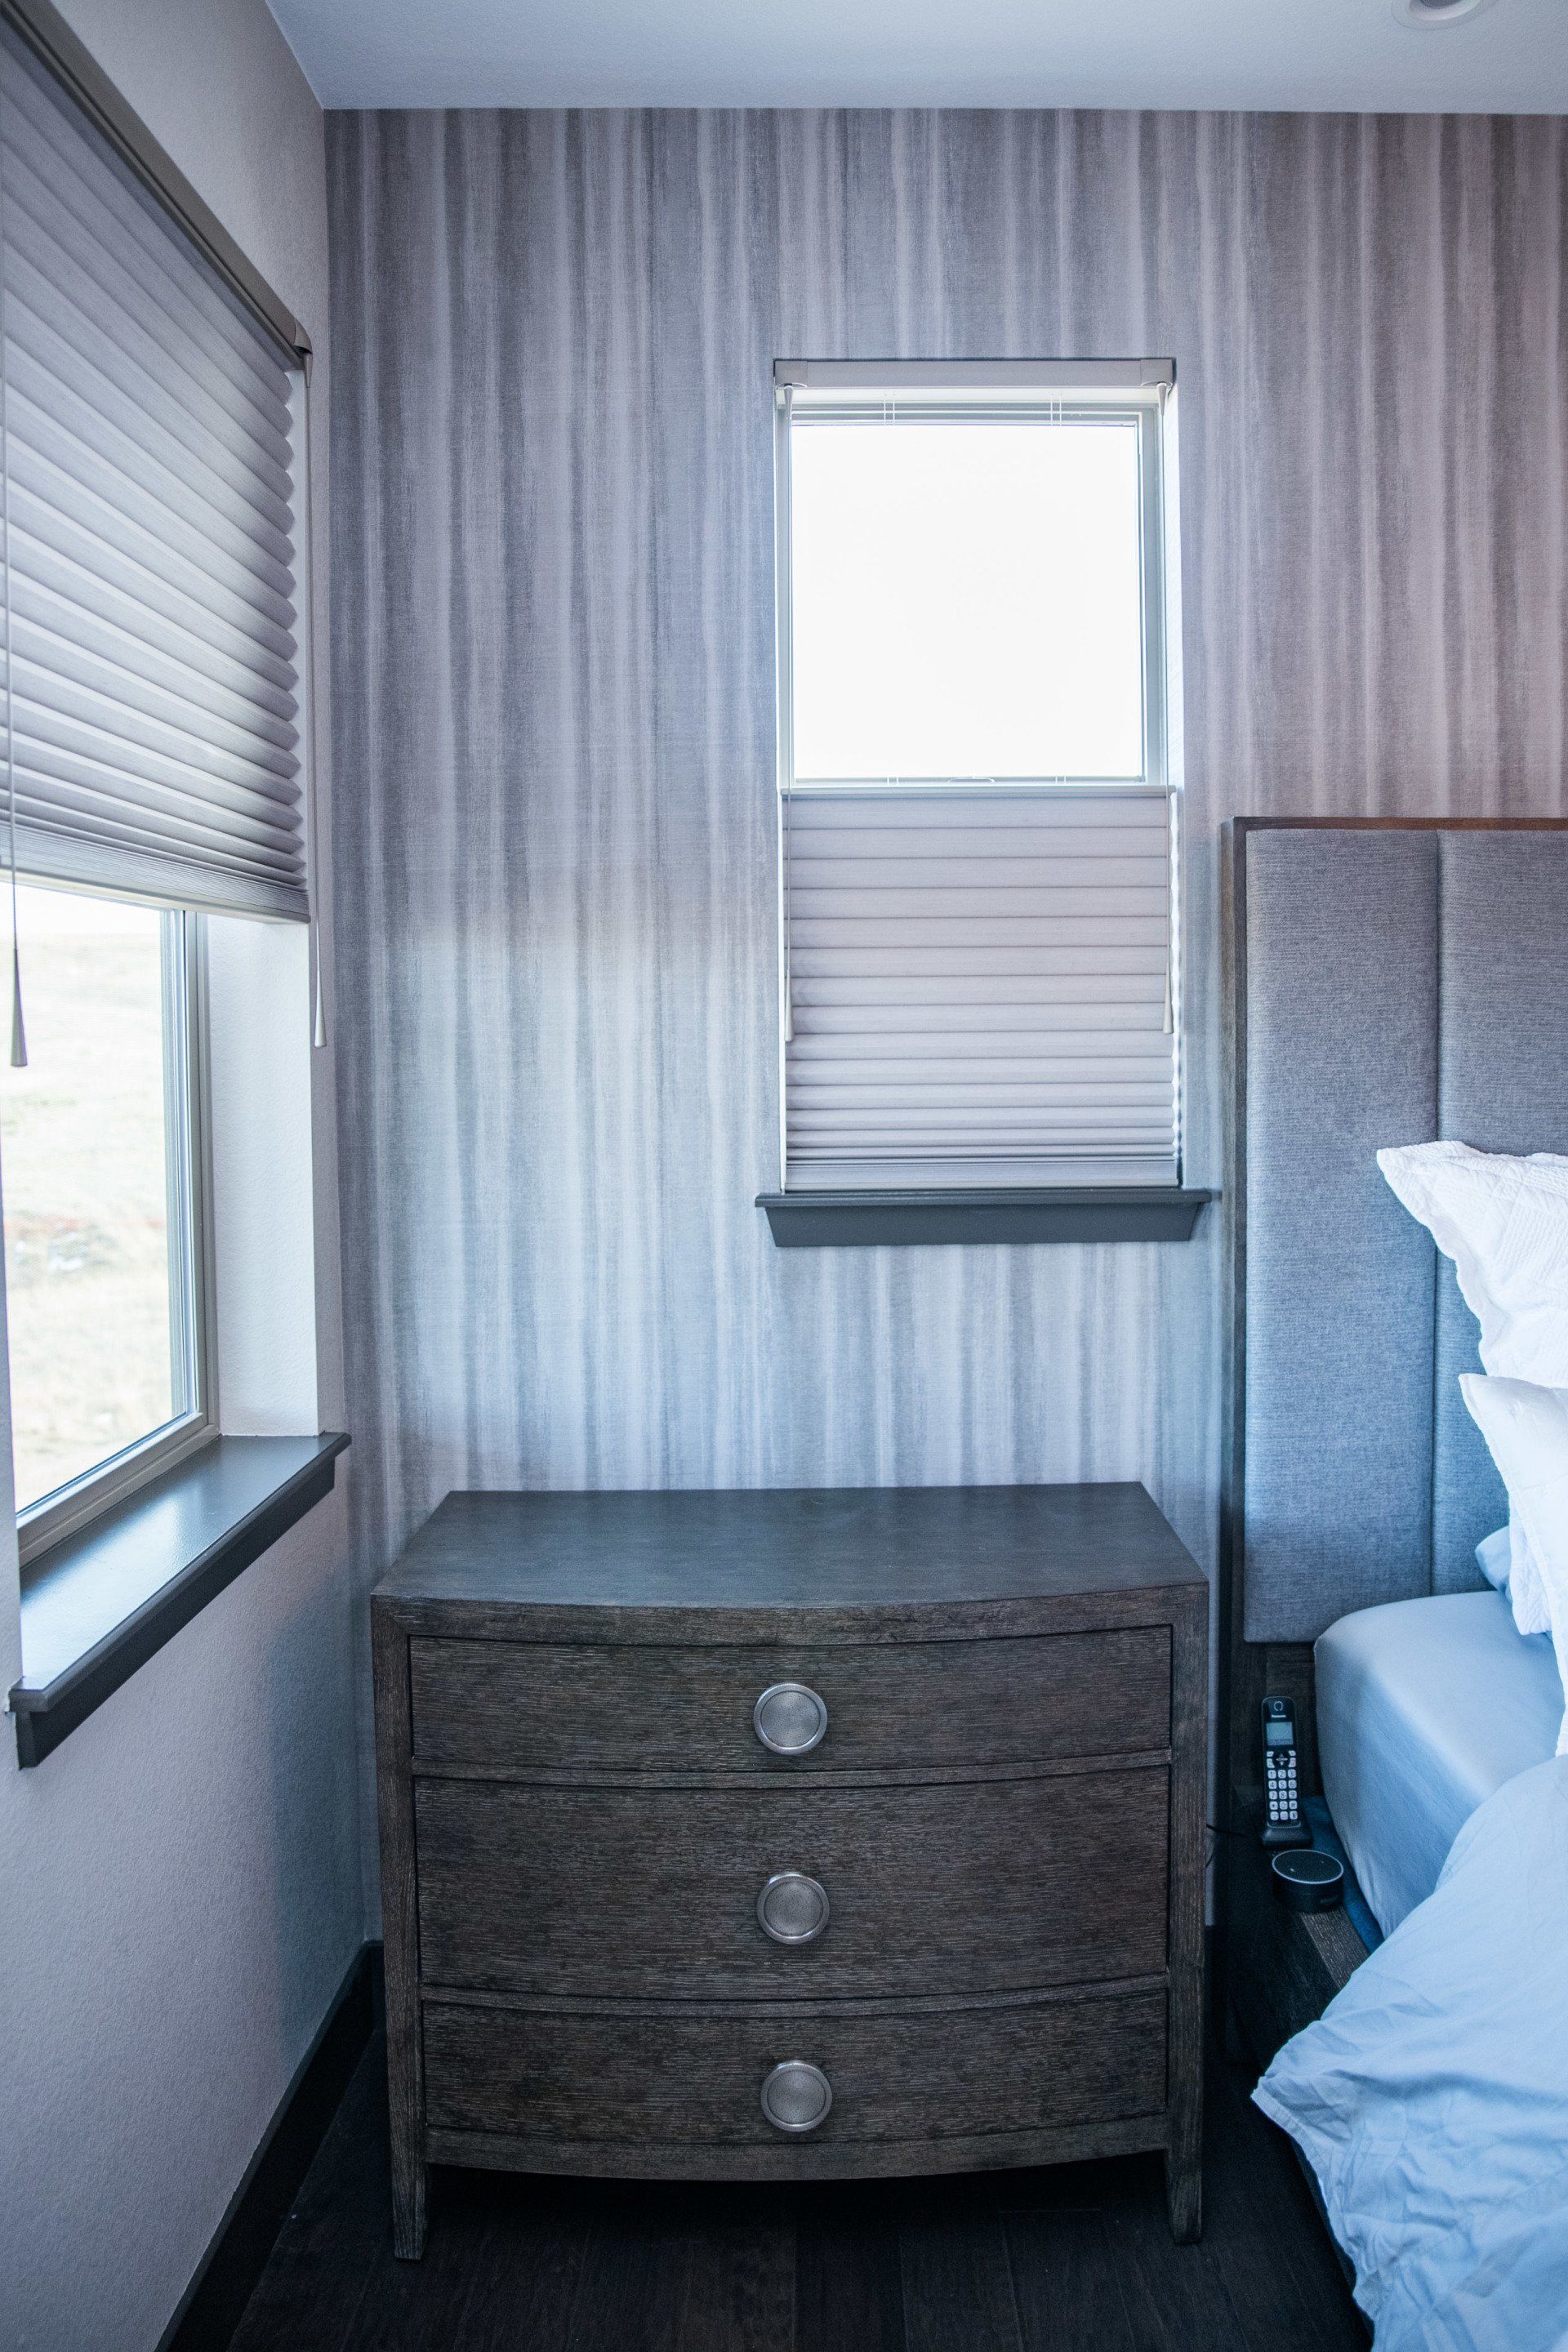 Night stand in front of reclaimed wood wallpaper and a window with a cellular shade